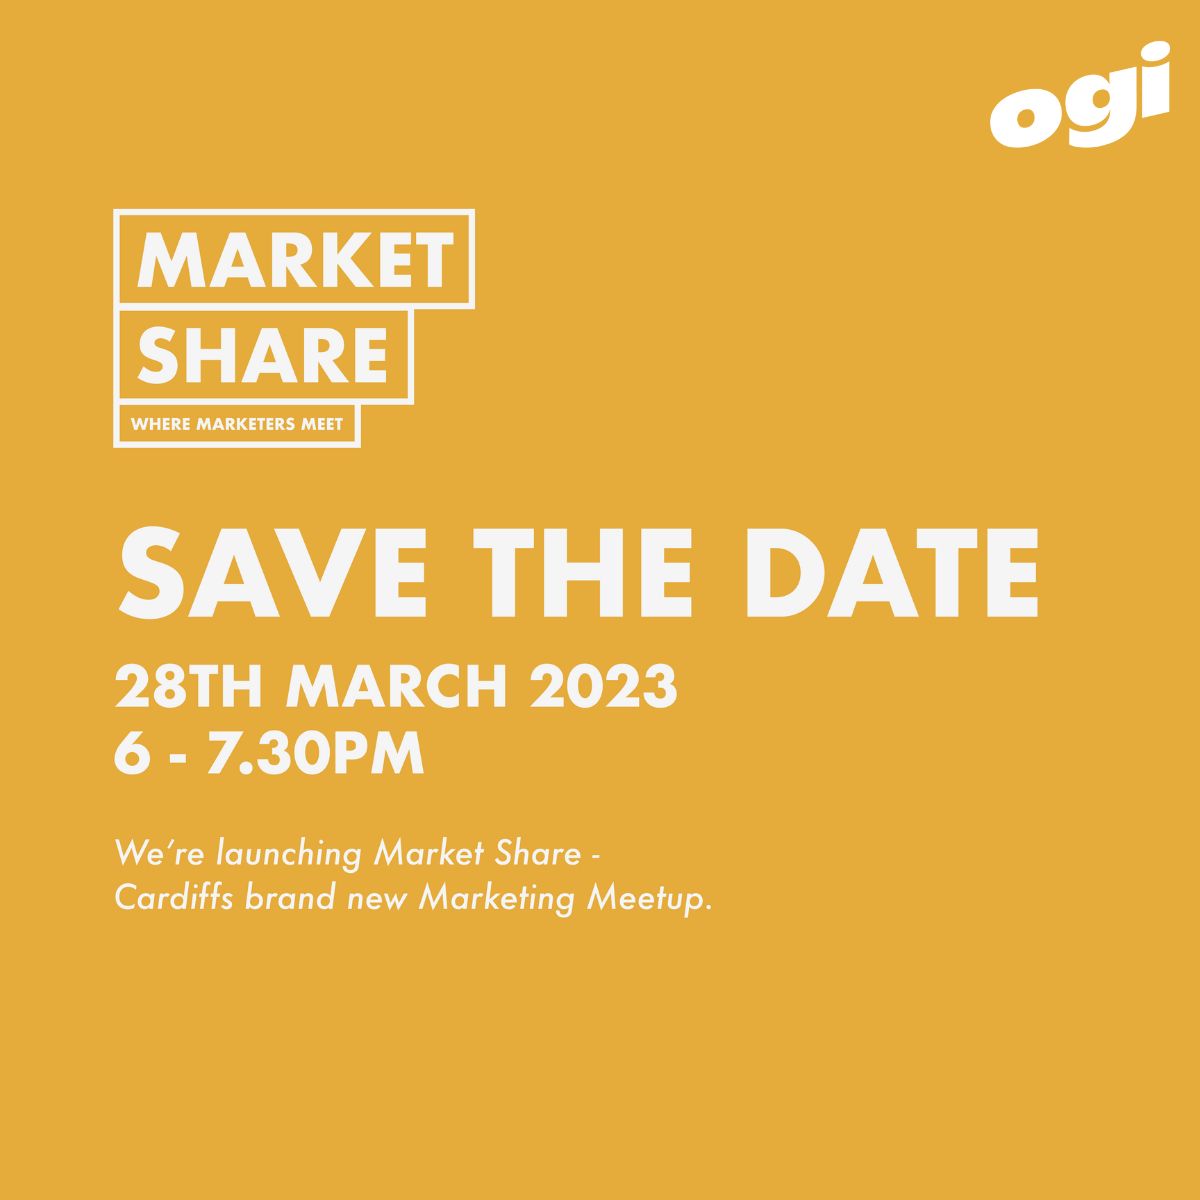 We've teemed up with our friends @TramshedTech, @Yolk_Recruit  and @Rockadove to bring you #Cardiff's brand new #marketing meetup for like-minded Marketeers.

Discuss the latest innovations in the sector and get insight from inspiring headline speakers.

👉rb.gy/7pmi2a